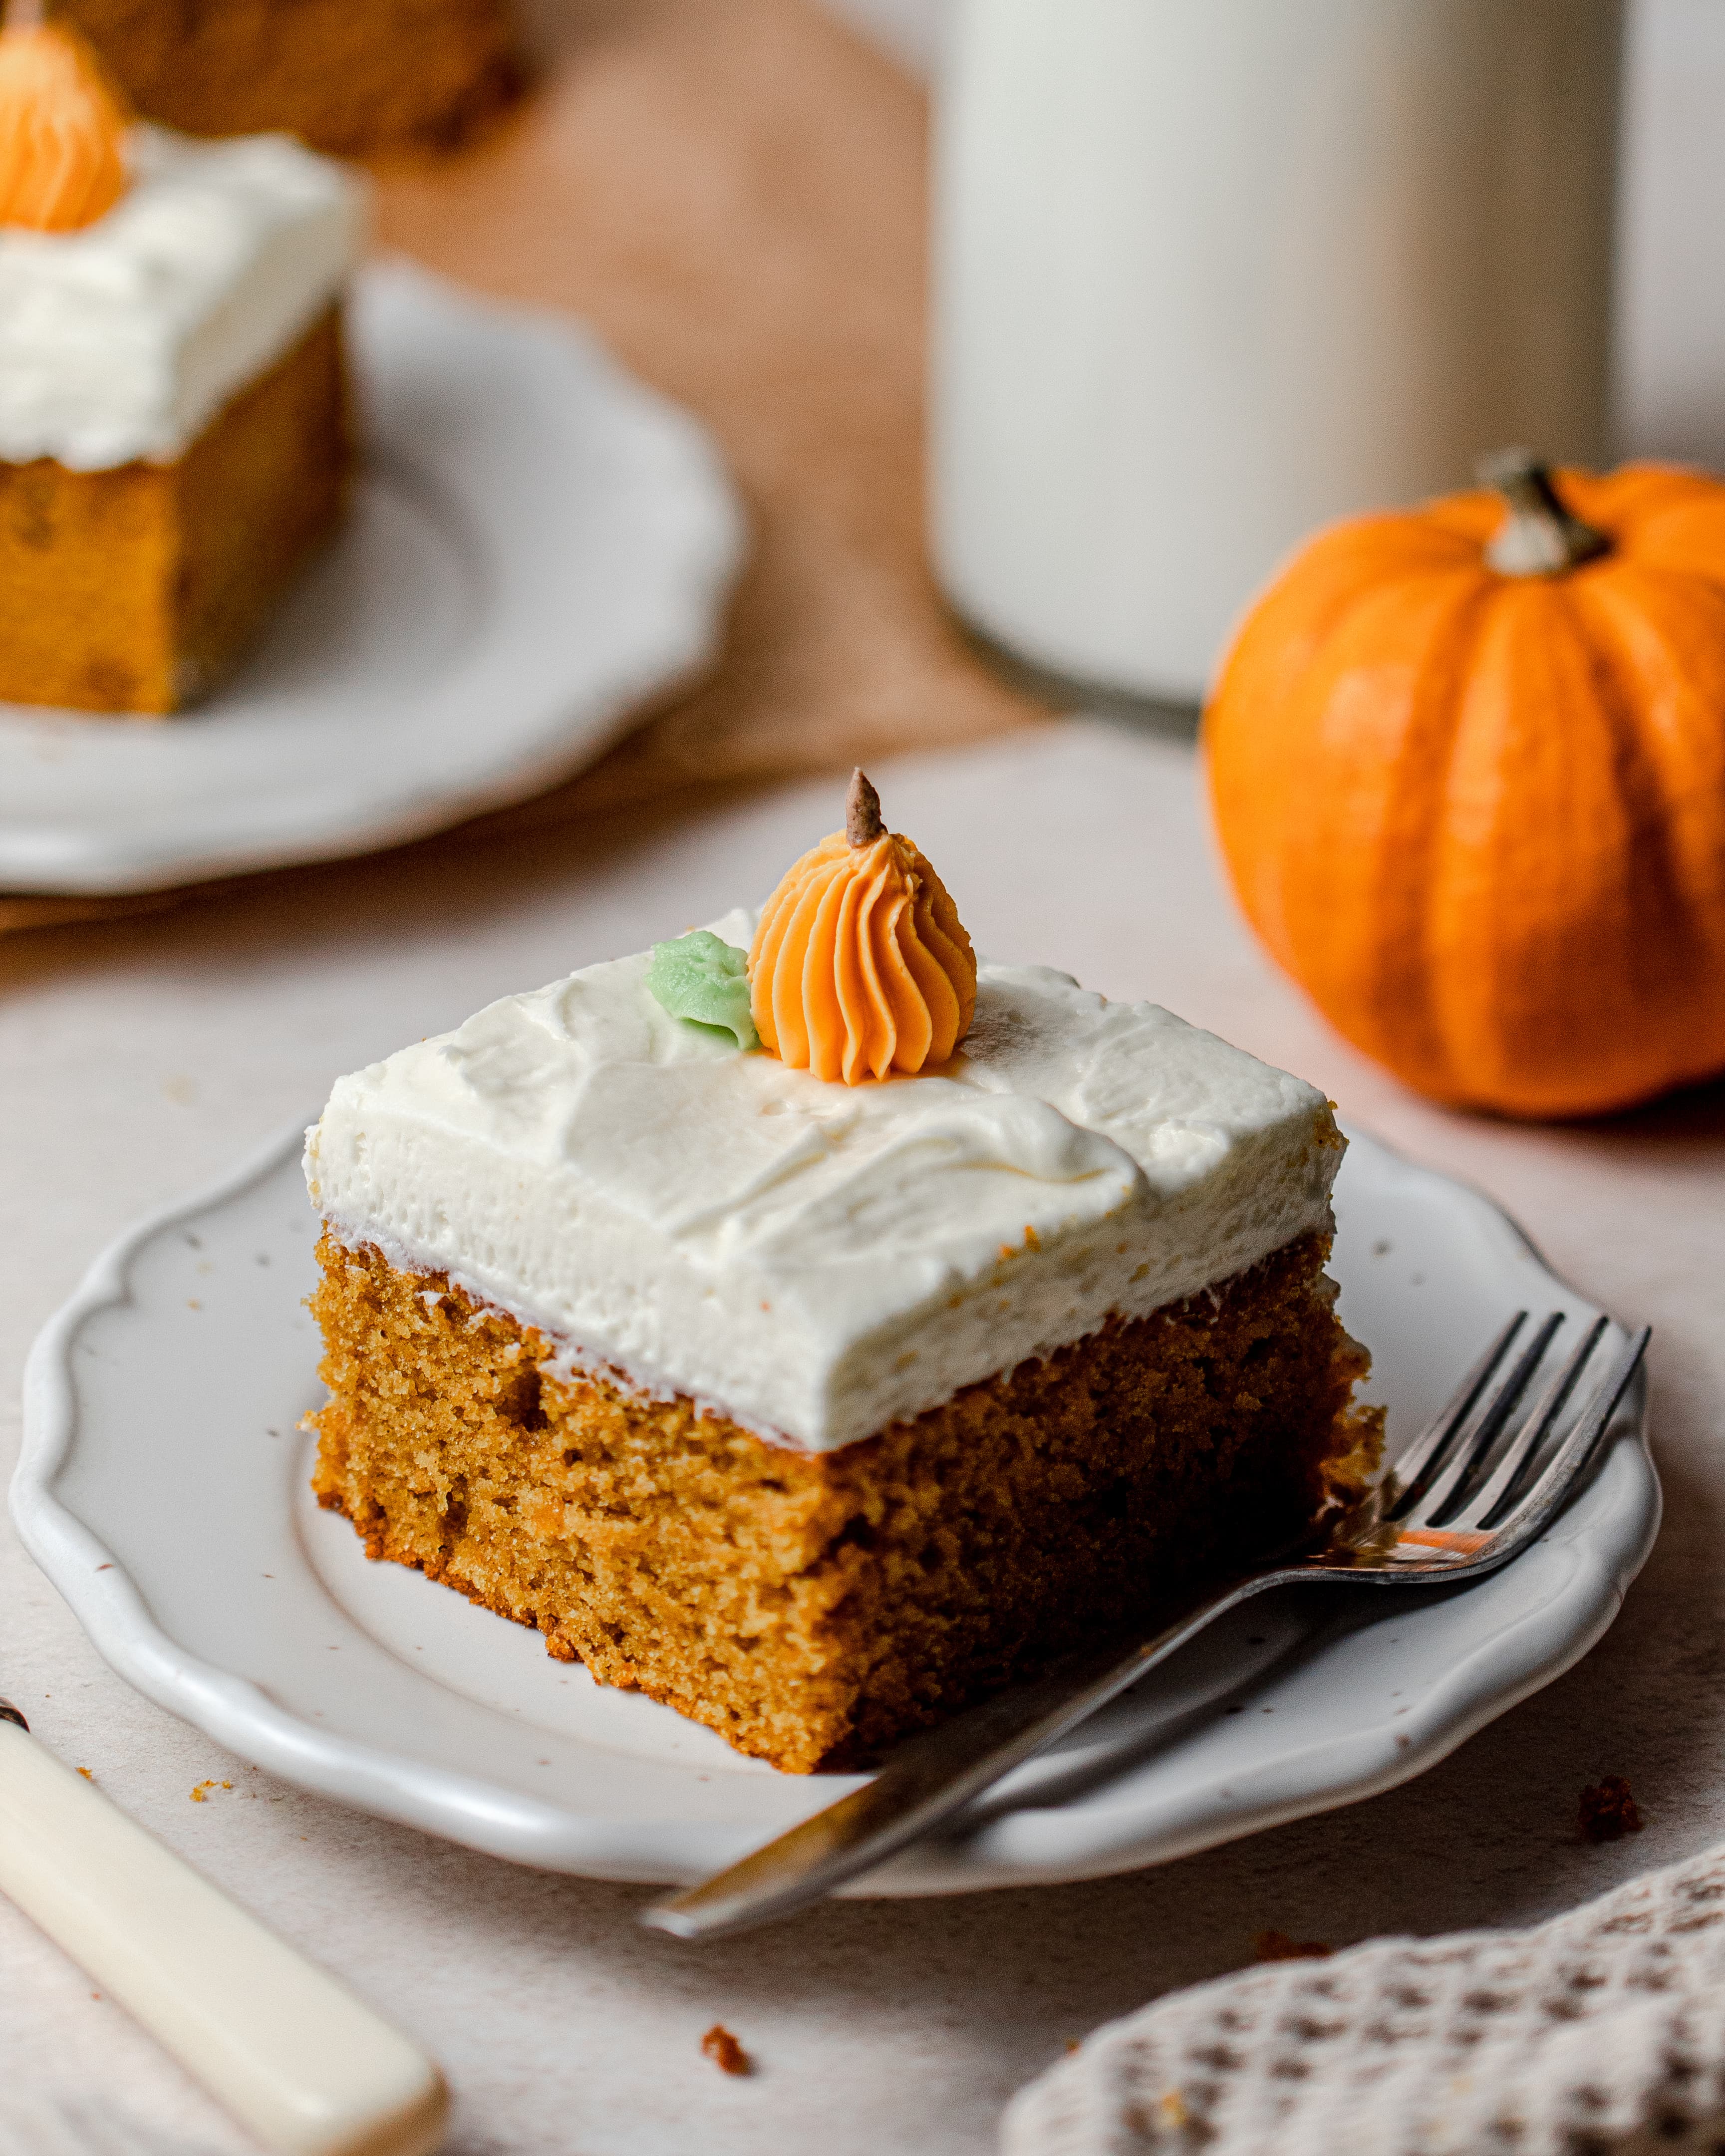 Pumpkin Traybake with Cream Cheese Frosting